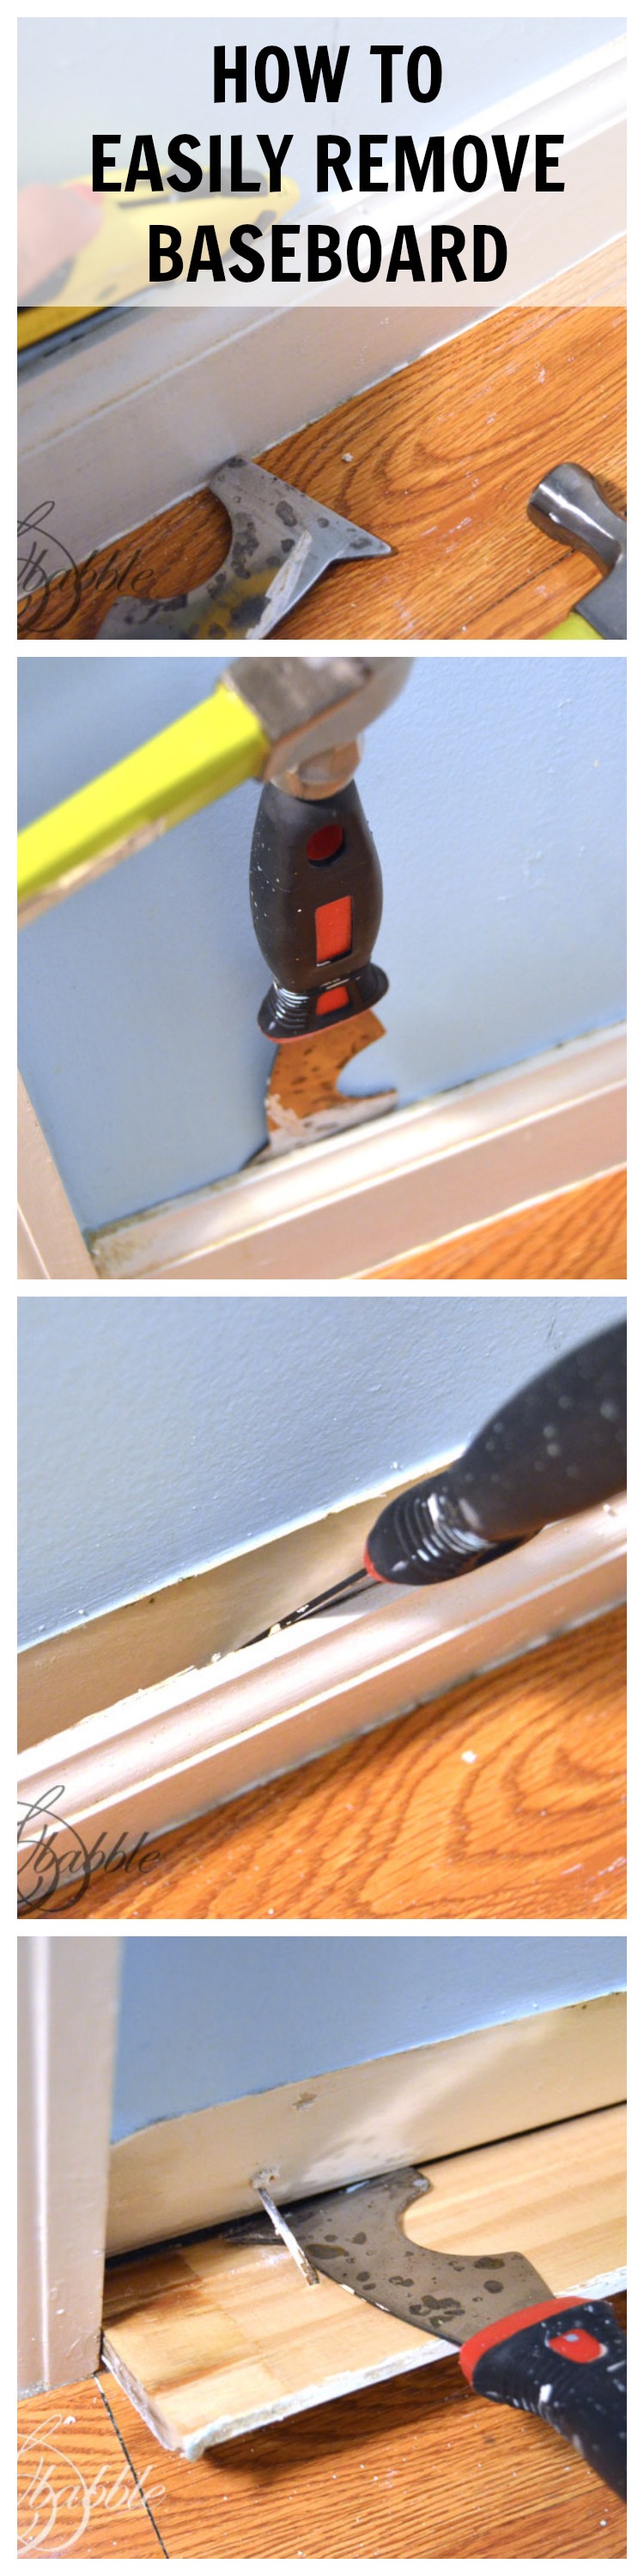 HOW TO REMOVE BASEBOARD